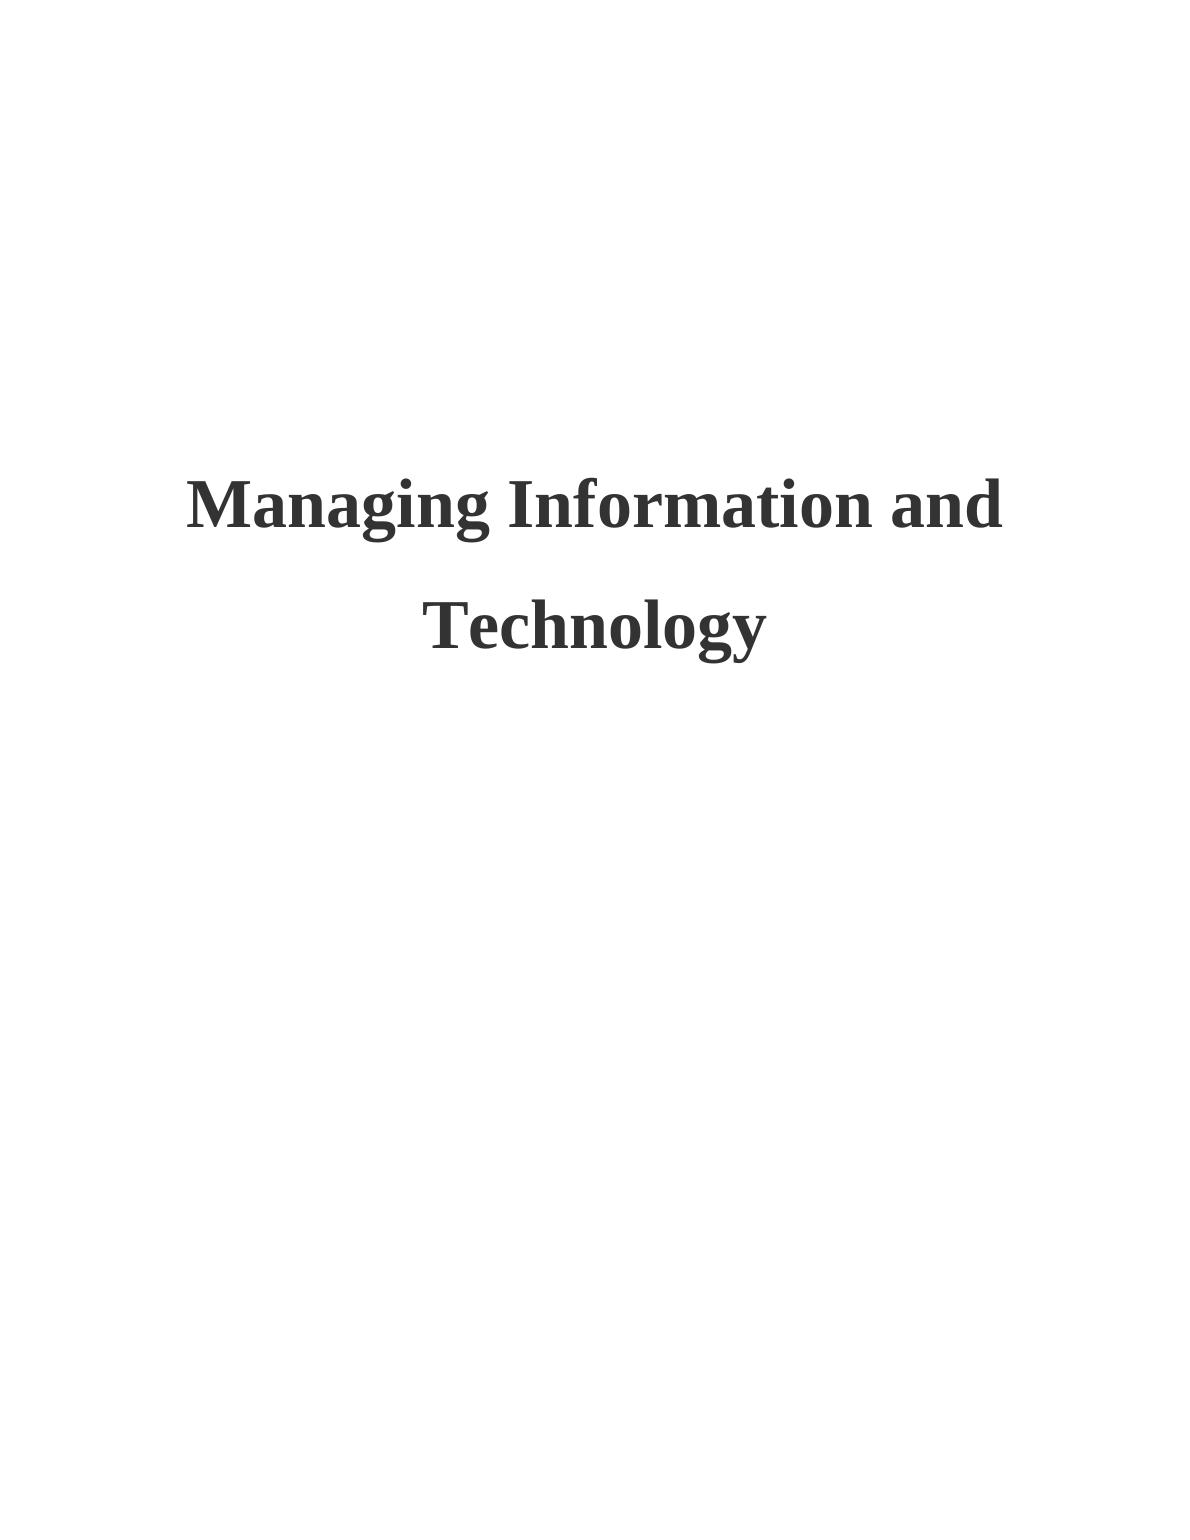 Managing Information and Technology– Doc_1